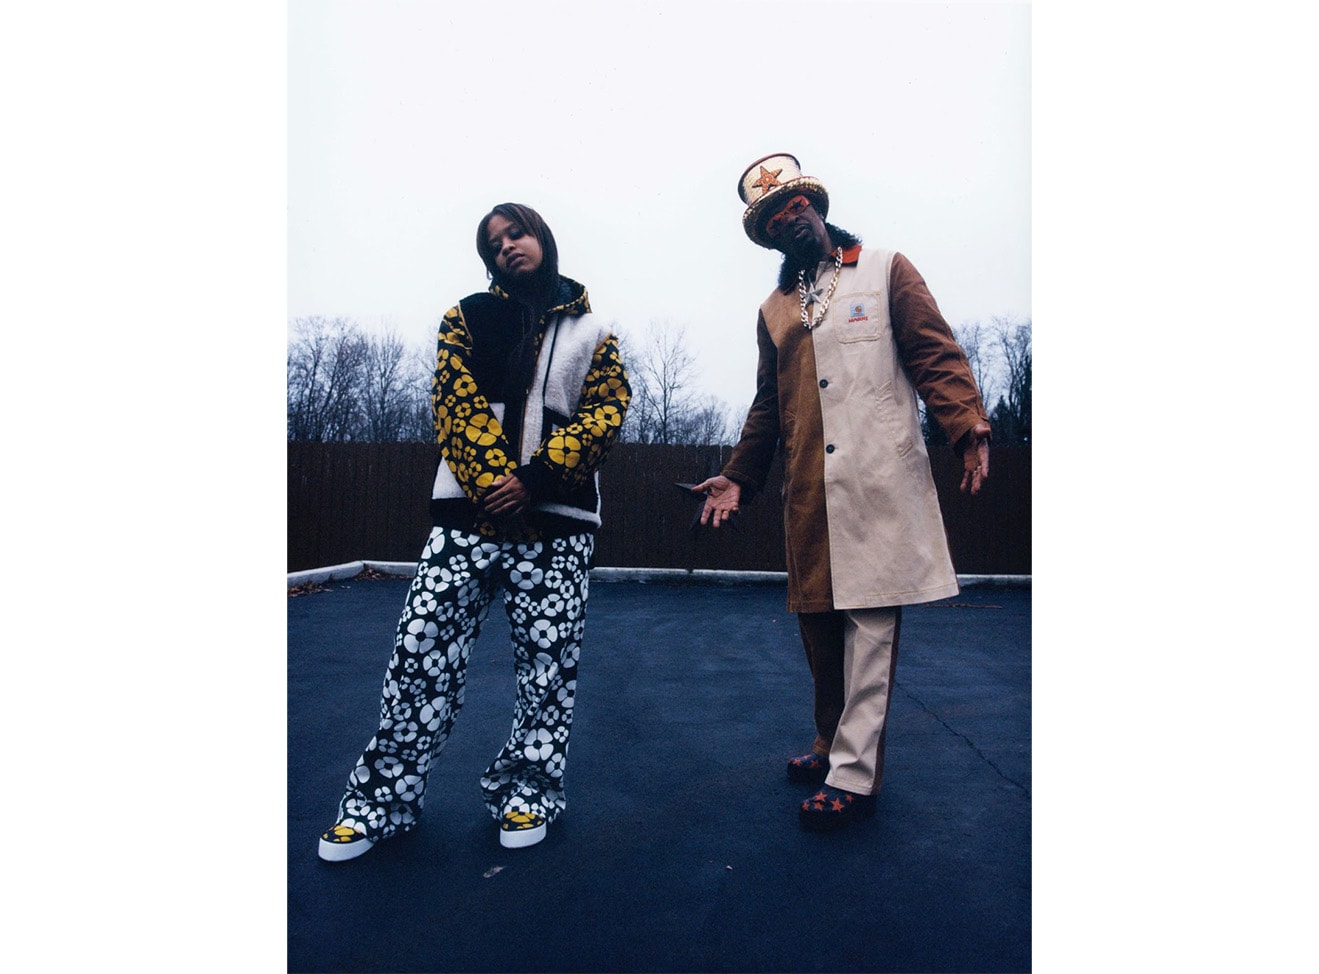 Two models standing side by side wearing Marni x Carhartt outerwear. Left: Jacket and pants with yellow and white floral print. Right: Two-toned brown coat and pants.